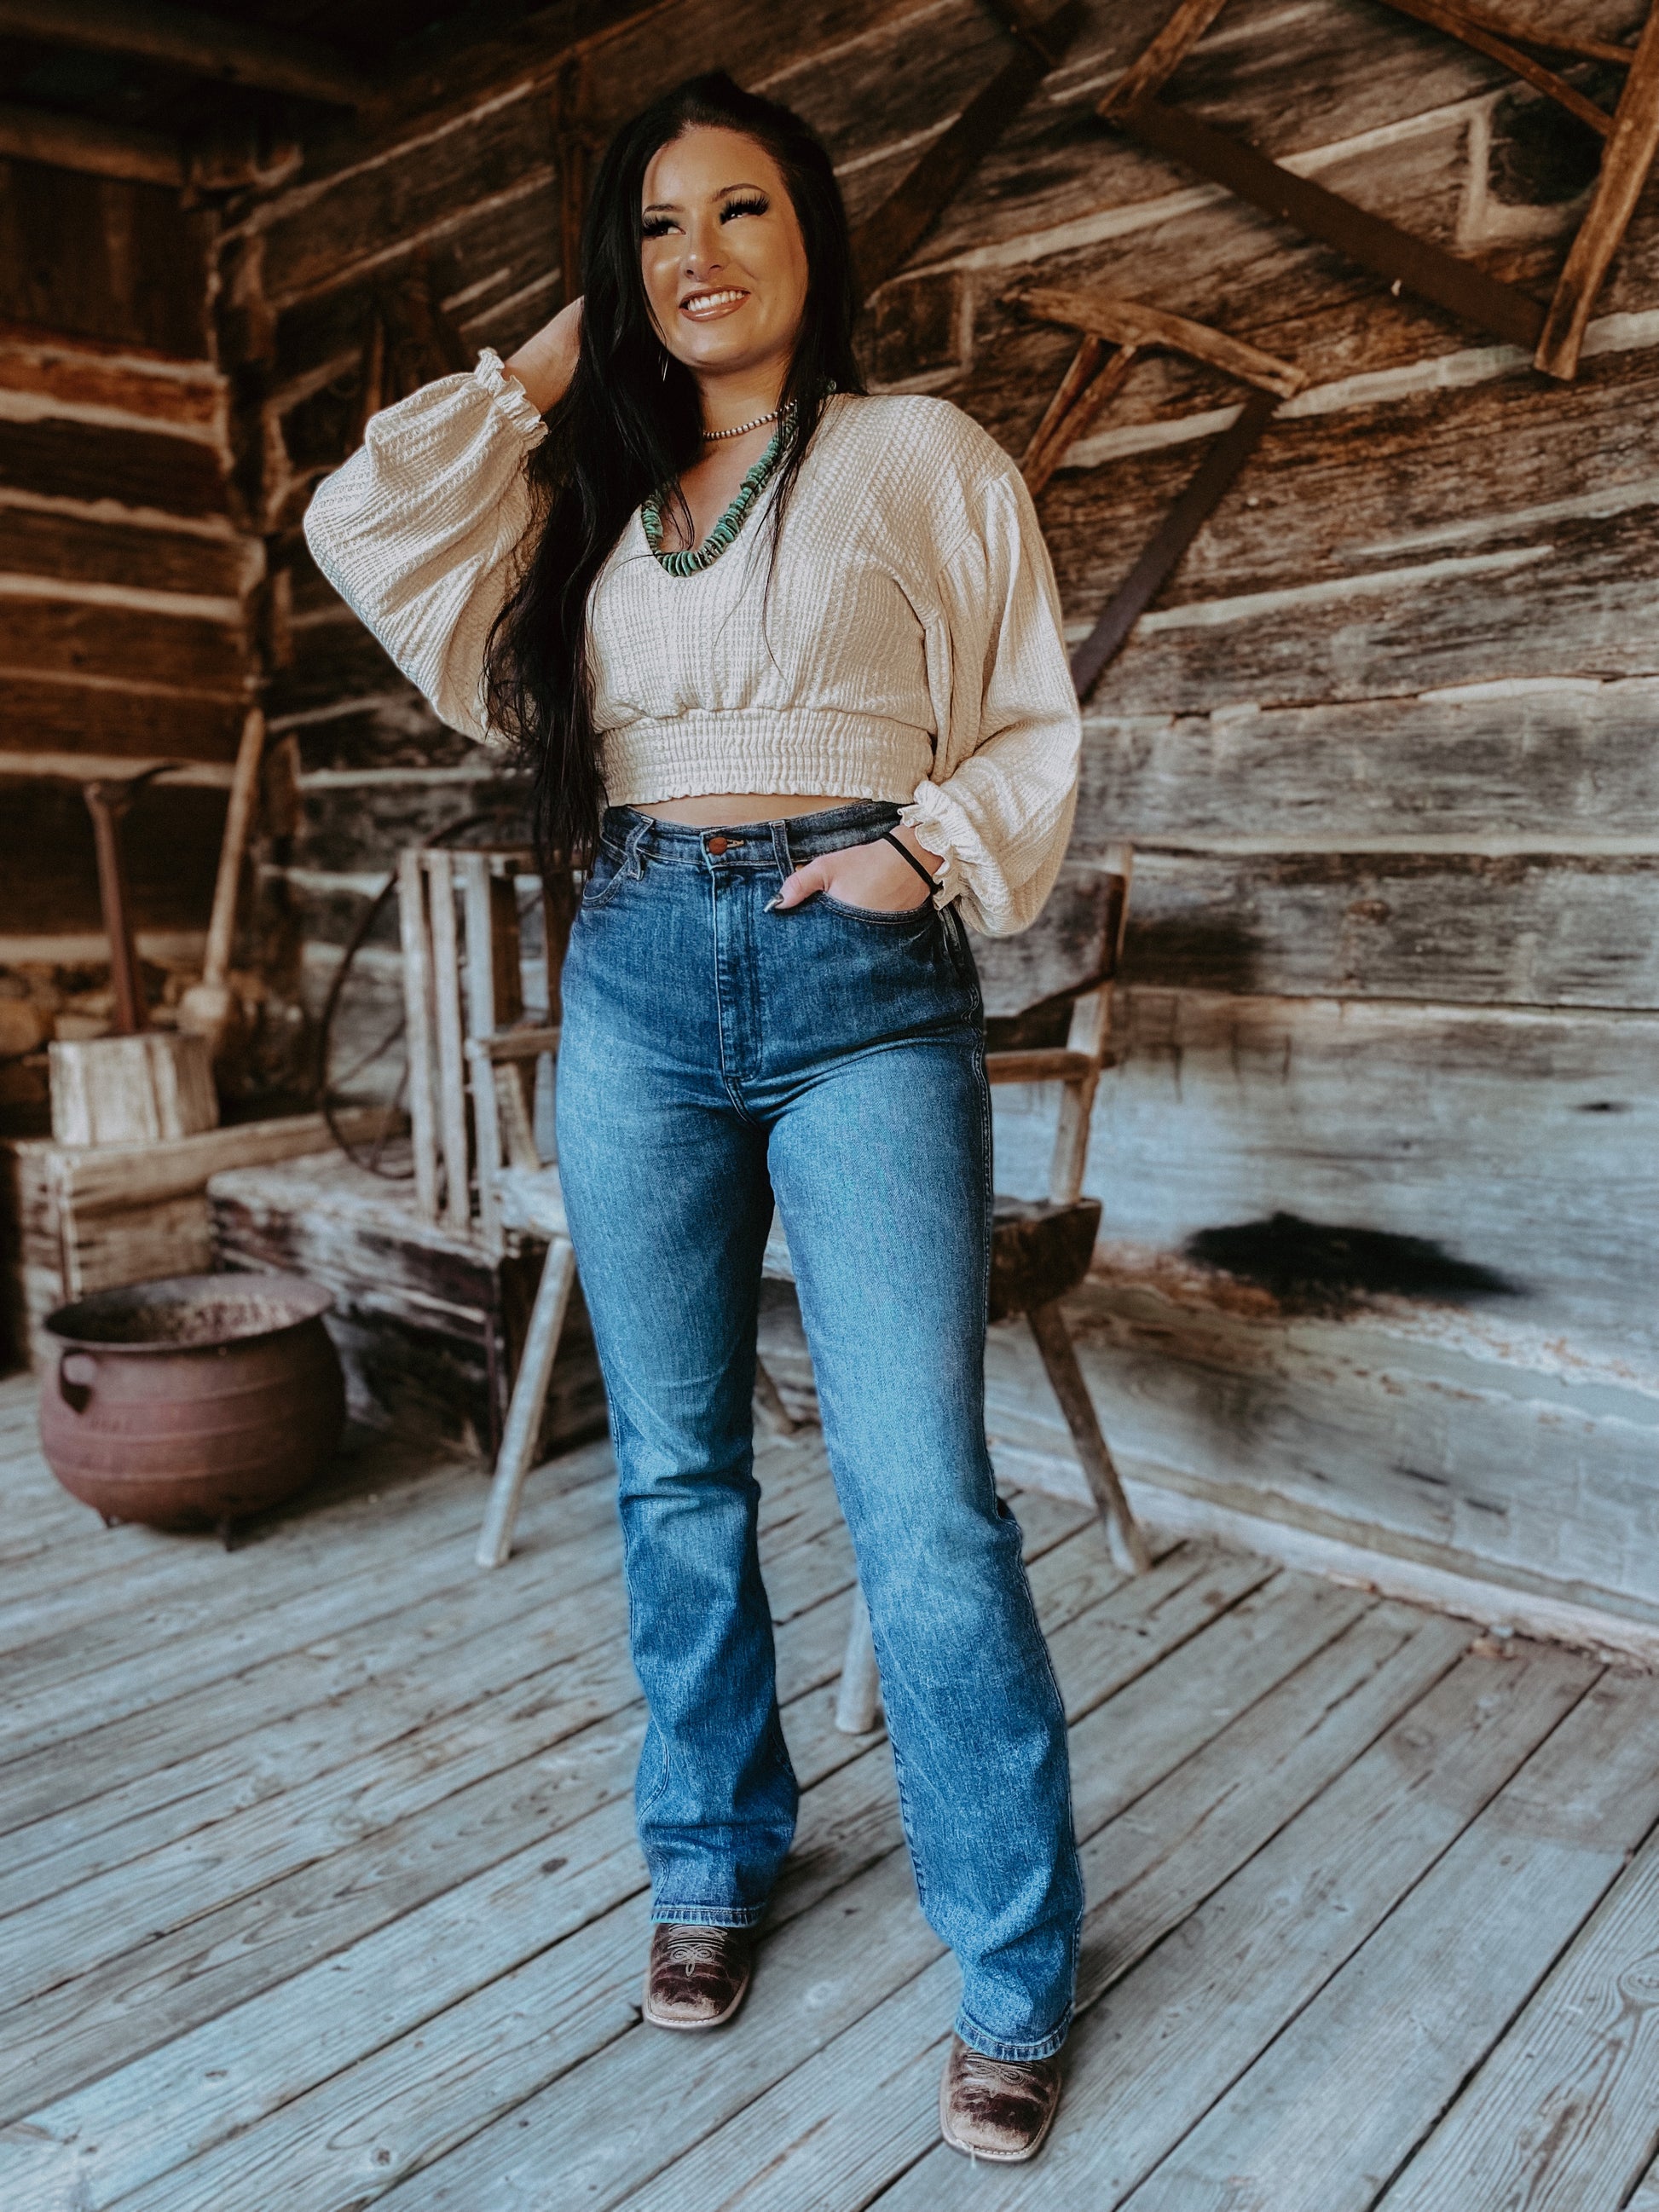 Wrangler Vintage Dusty Aged Bootcut